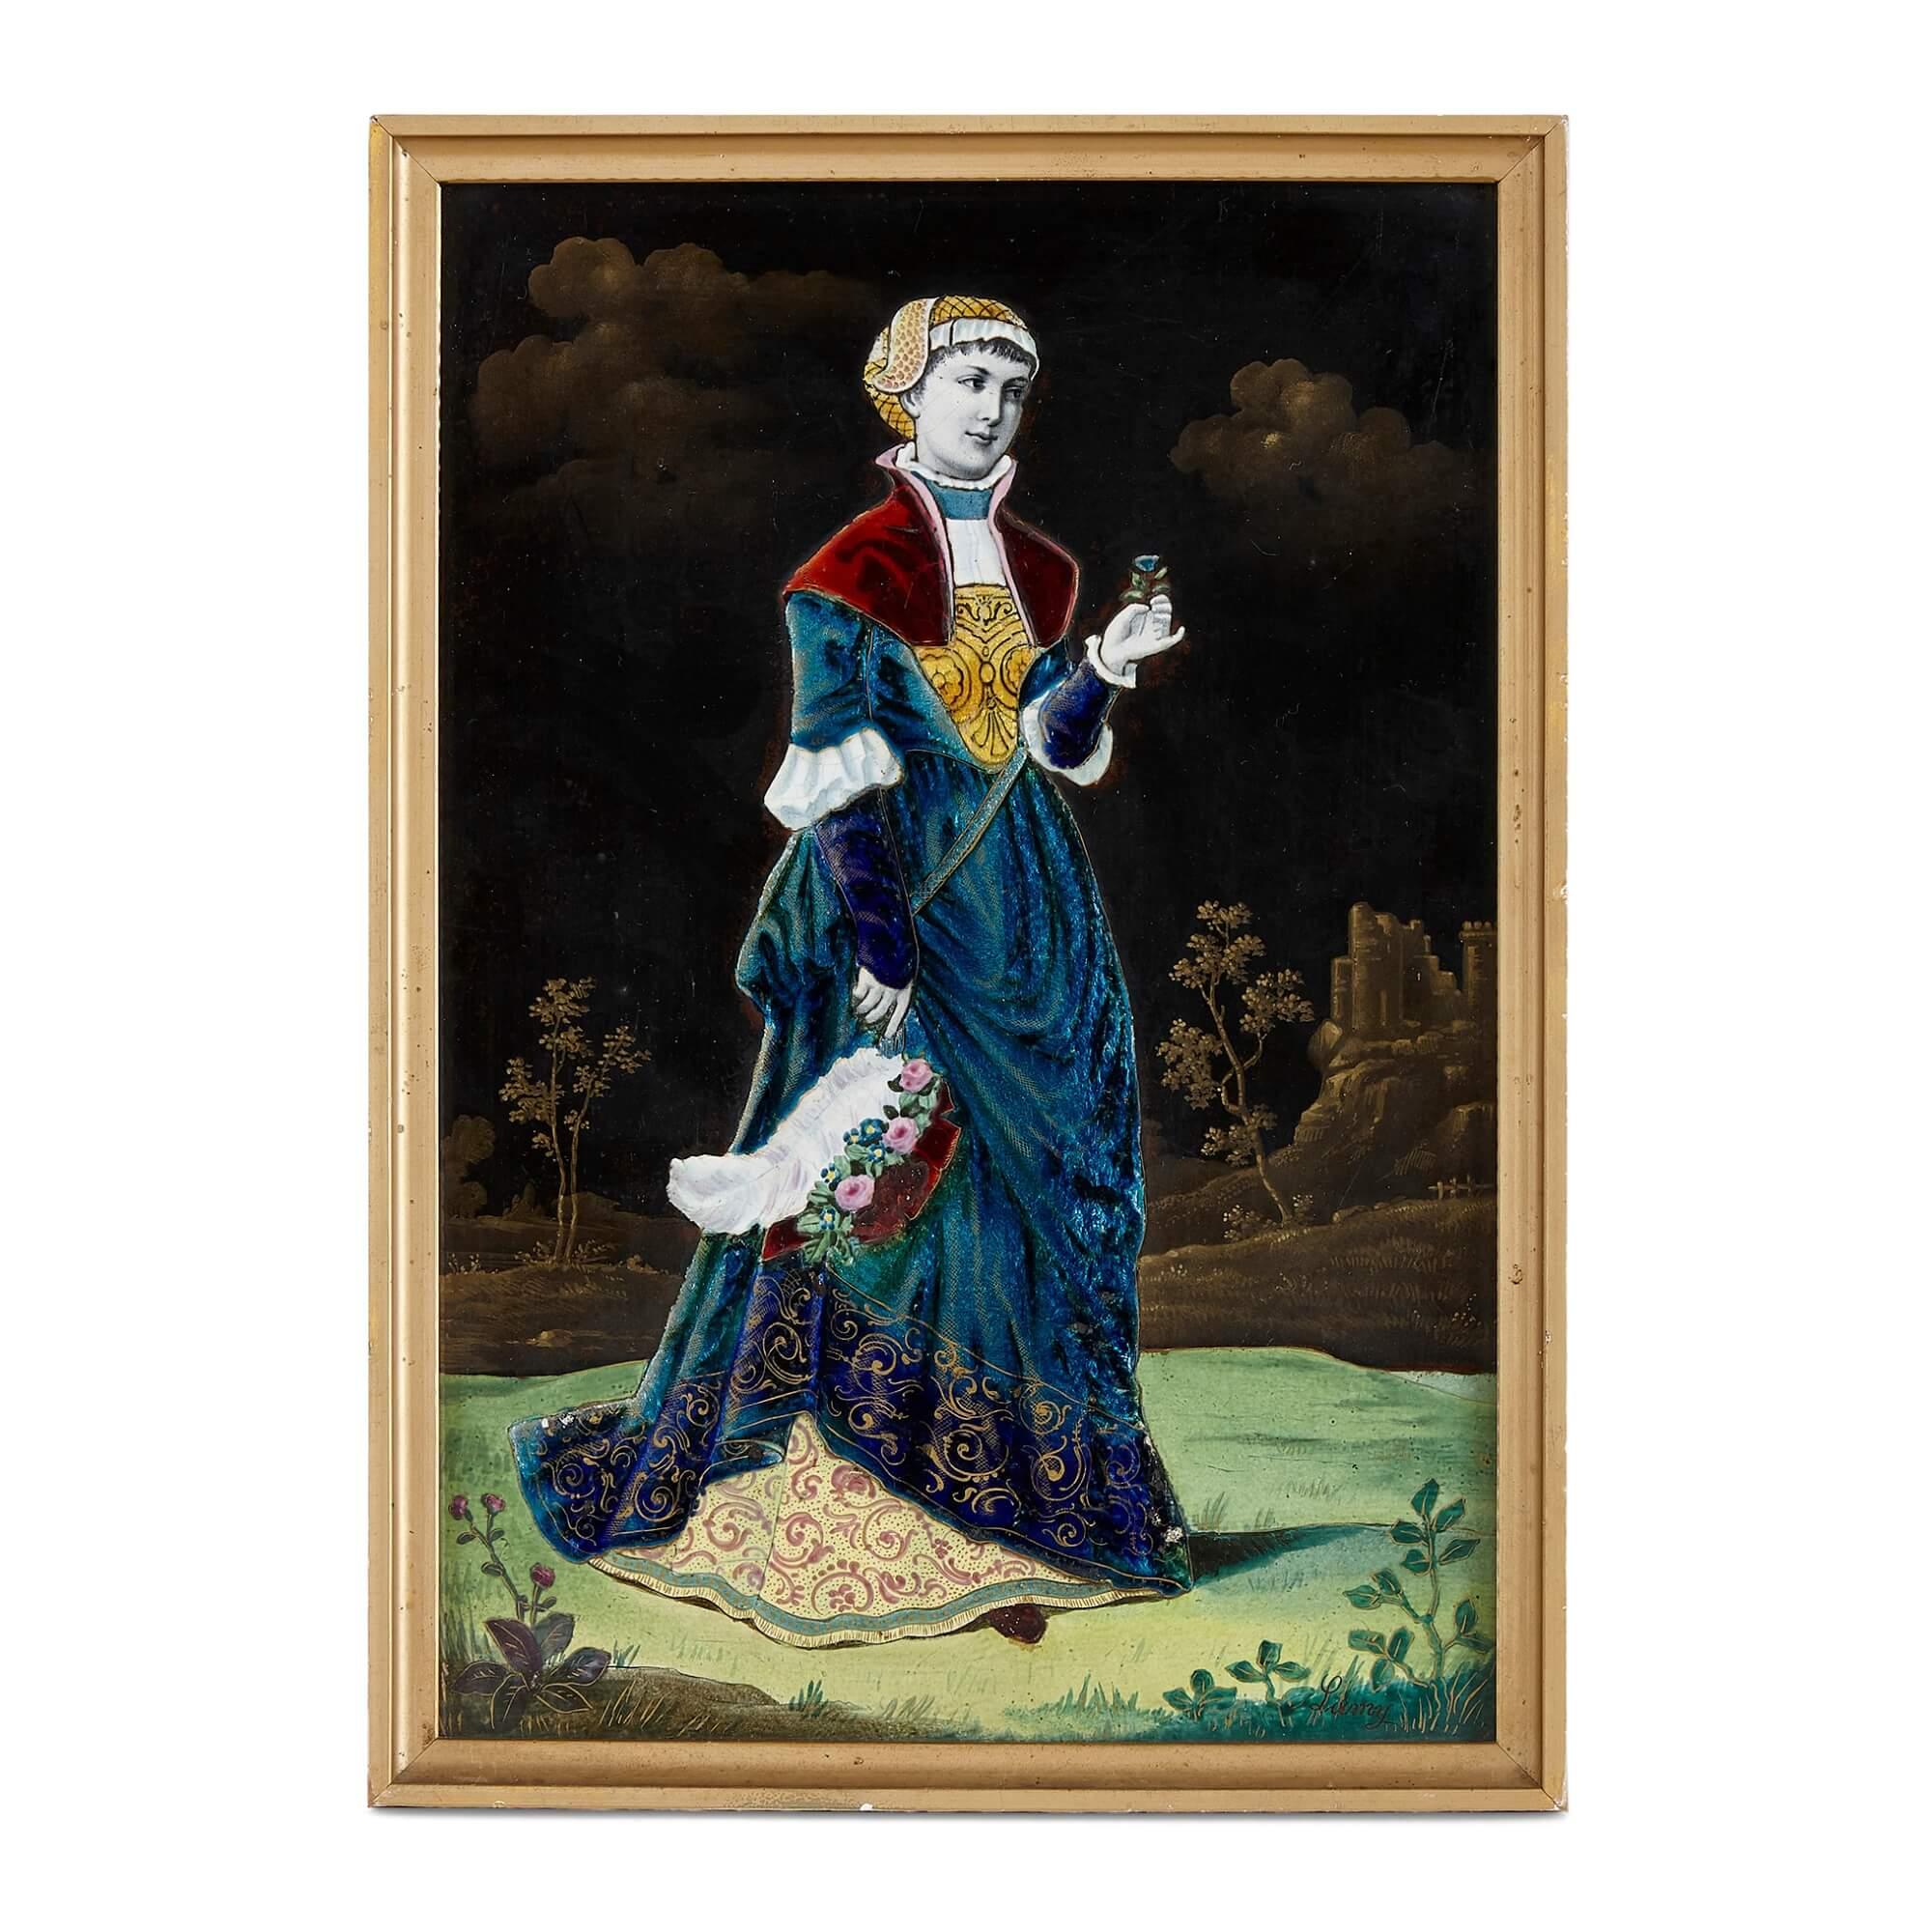 Pair of French Renaissance style enamelled porcelain plaques
French, c. 1880
Frame: Height 32cm, width 22.5cm, depth 1.5cm
Plaque: Height 30cm, width 20.5cm, depth 0.5cm

These elegant porcelain plaques are overlaid with bright enamels. The plaques